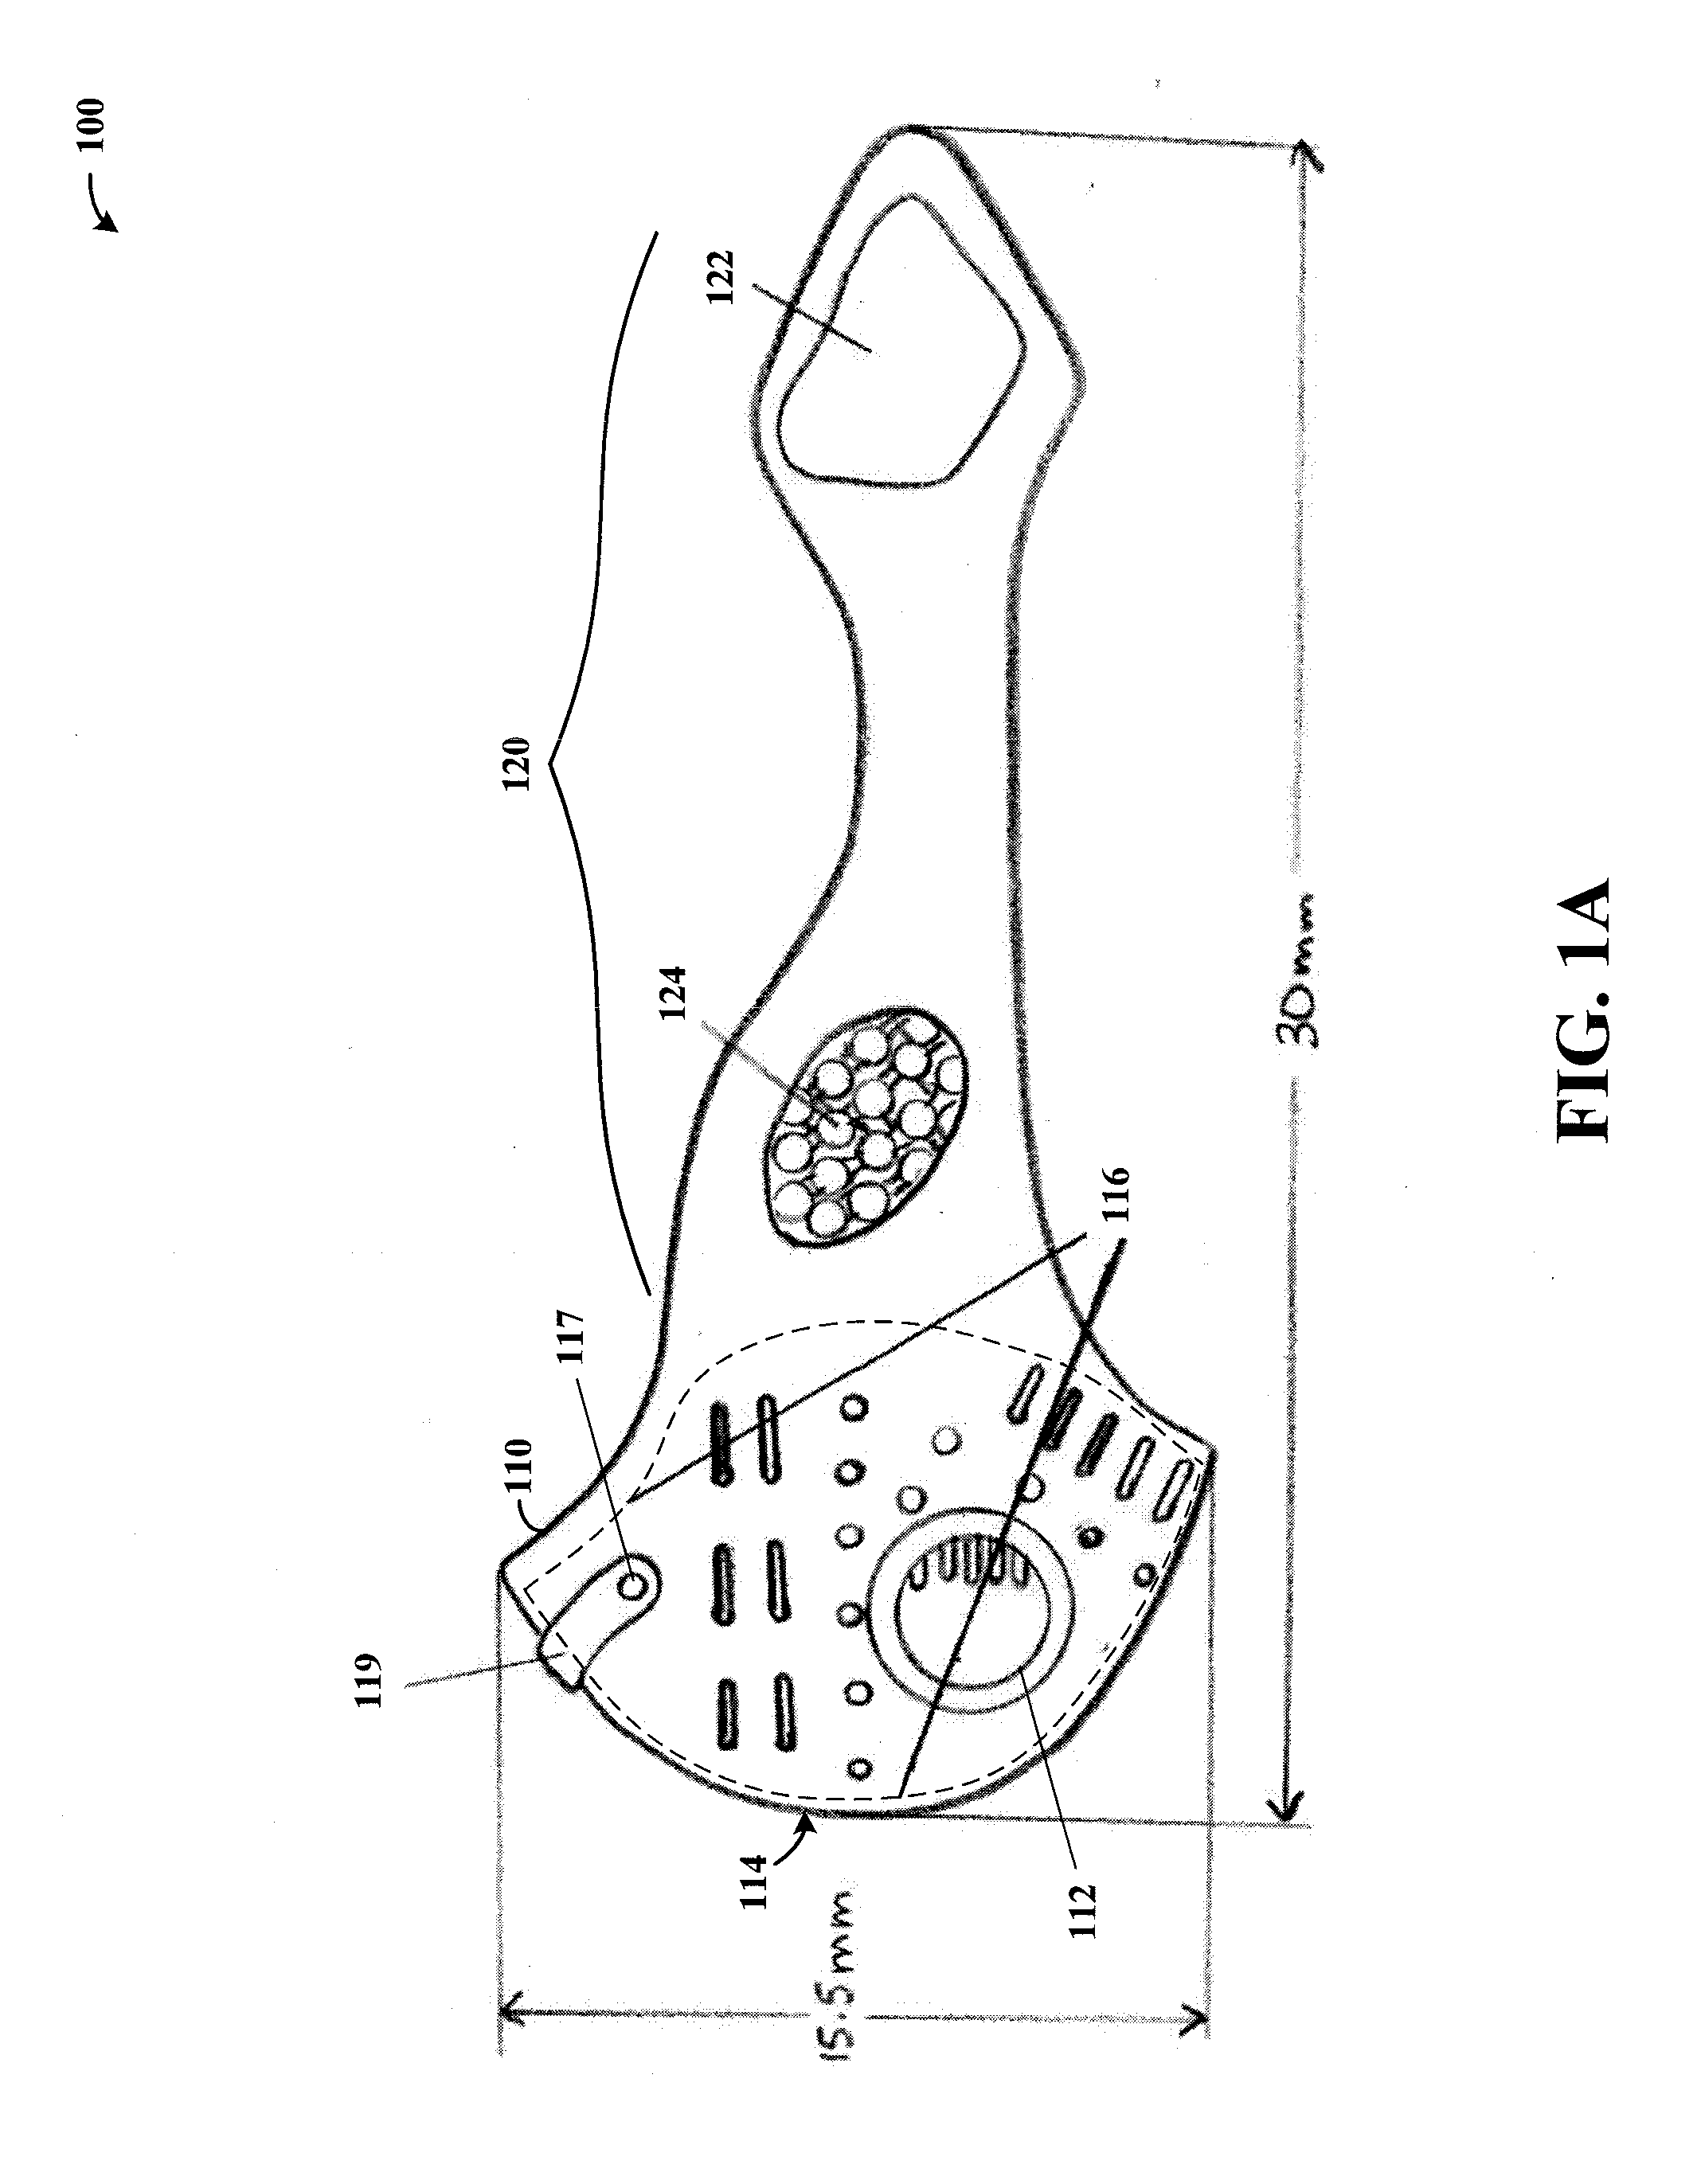 Face mask apparatus and system